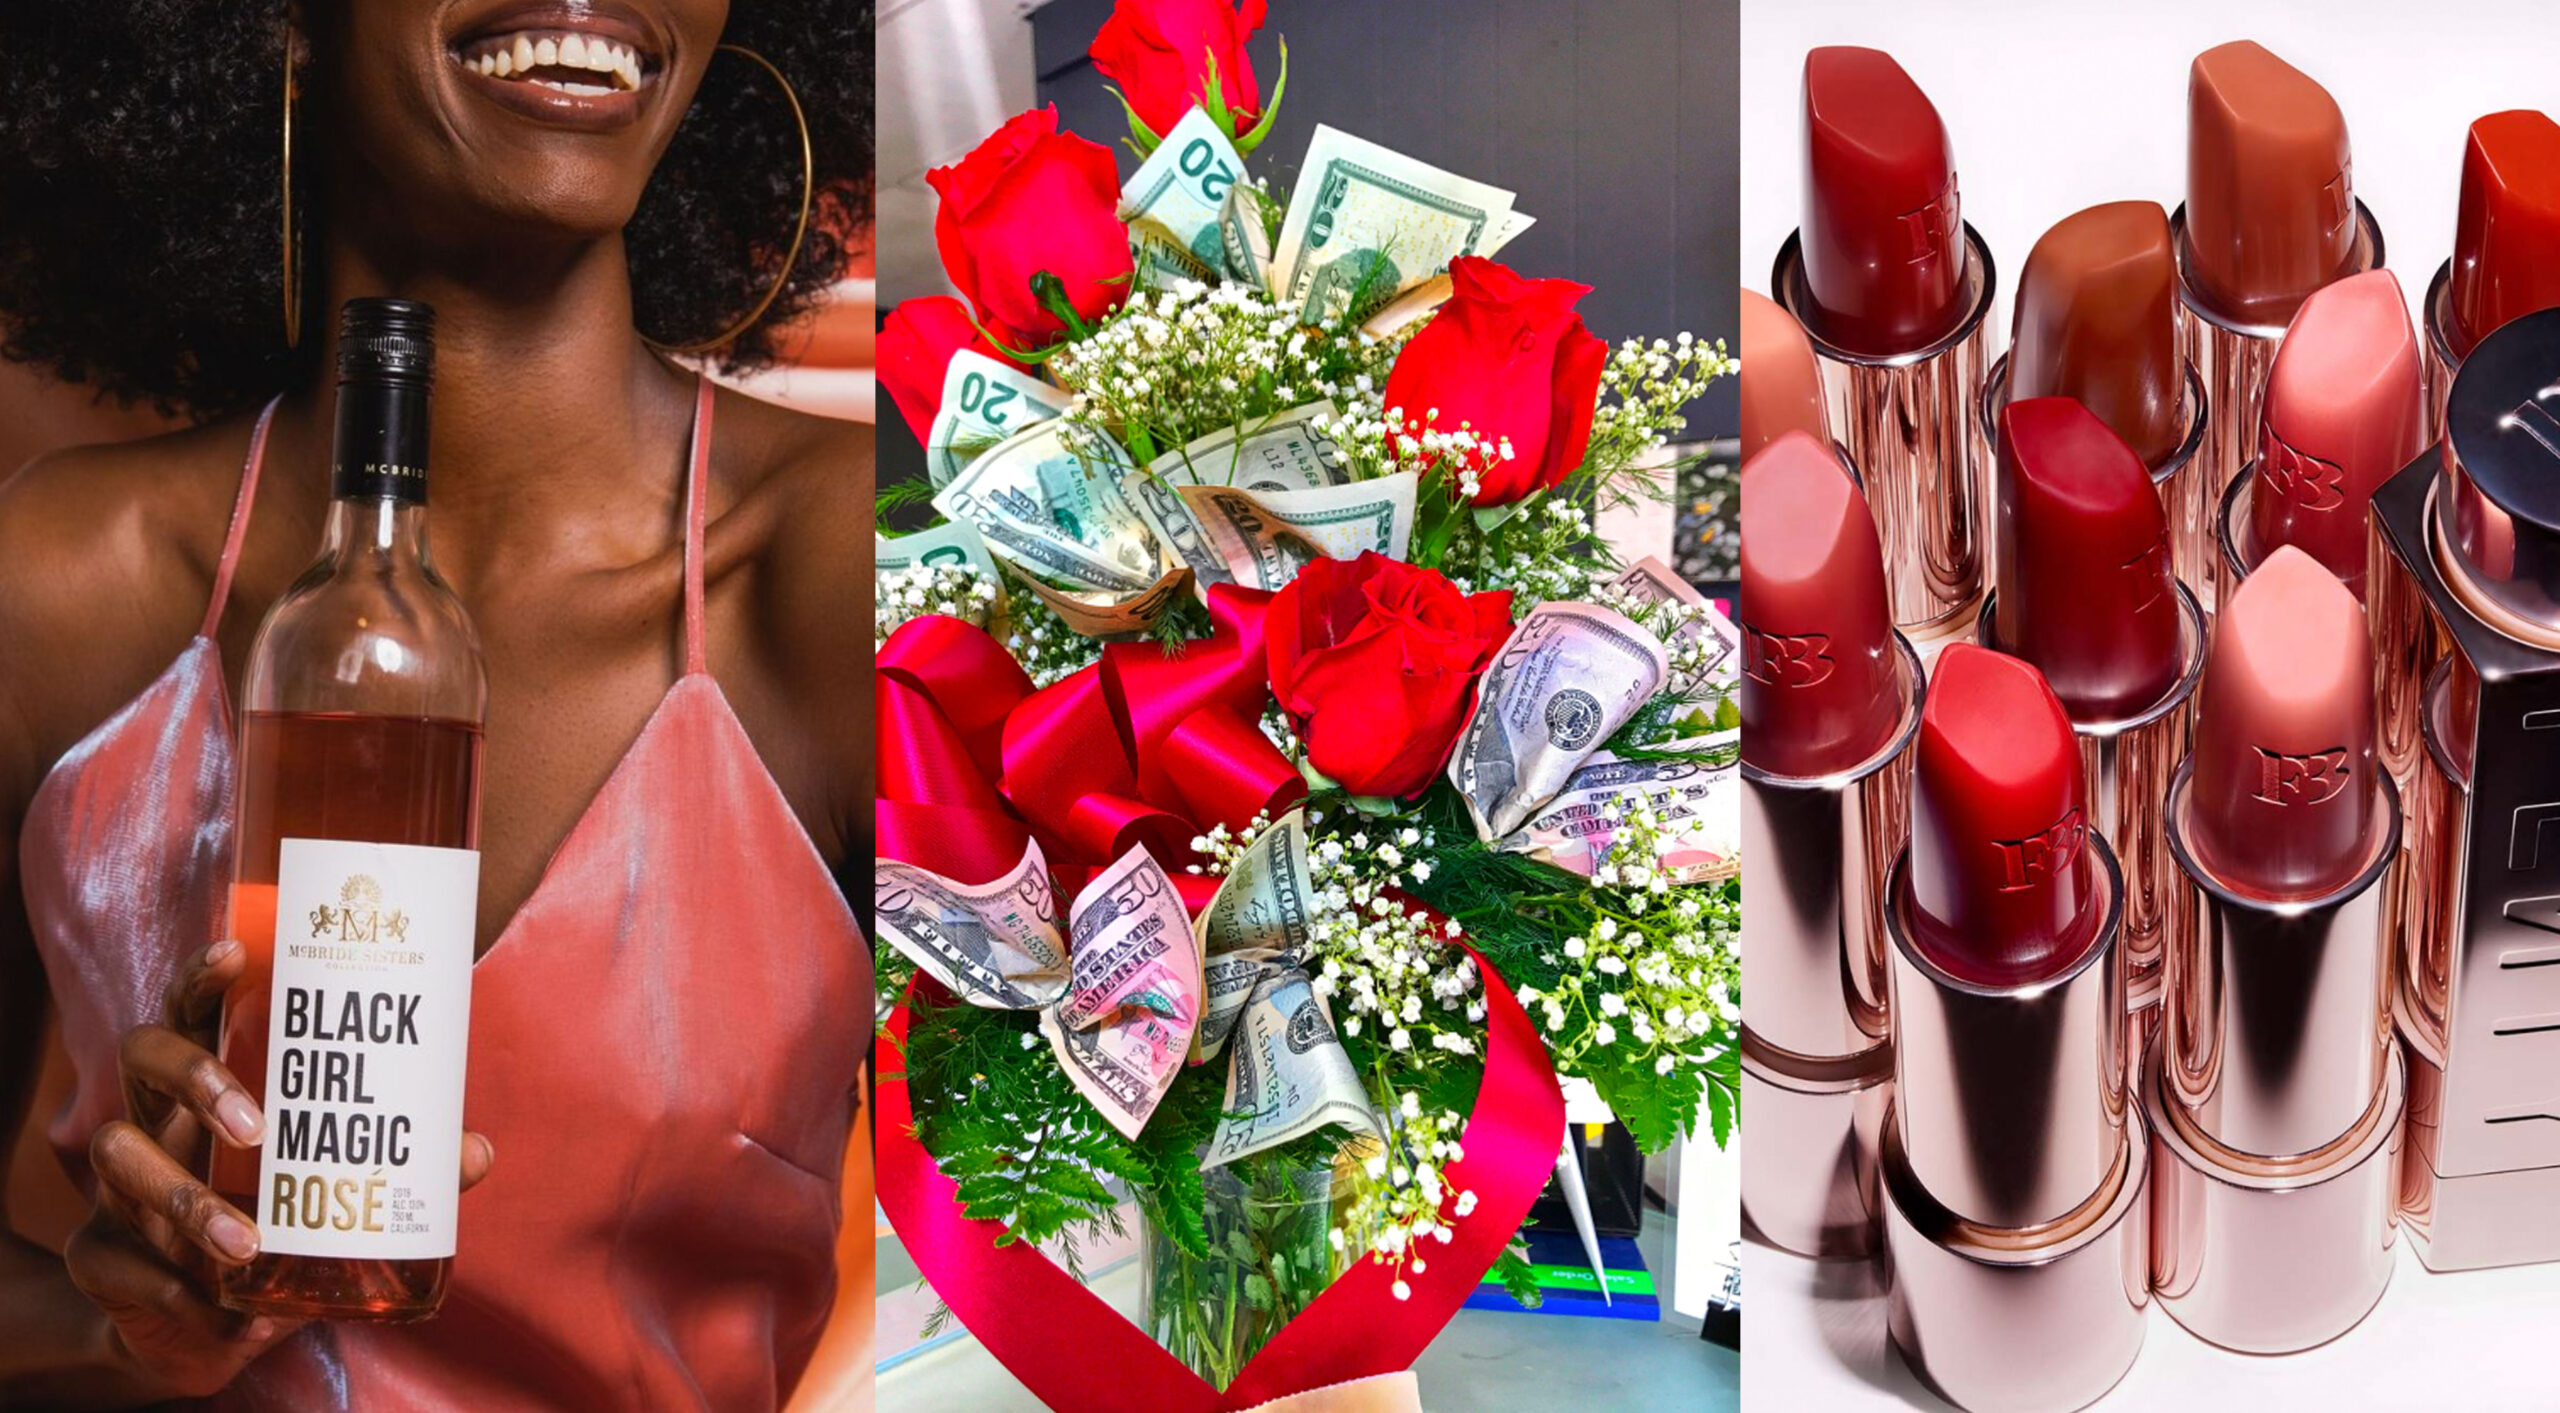 6 Of The Best Last-Minute Valentine’s Day Gifts